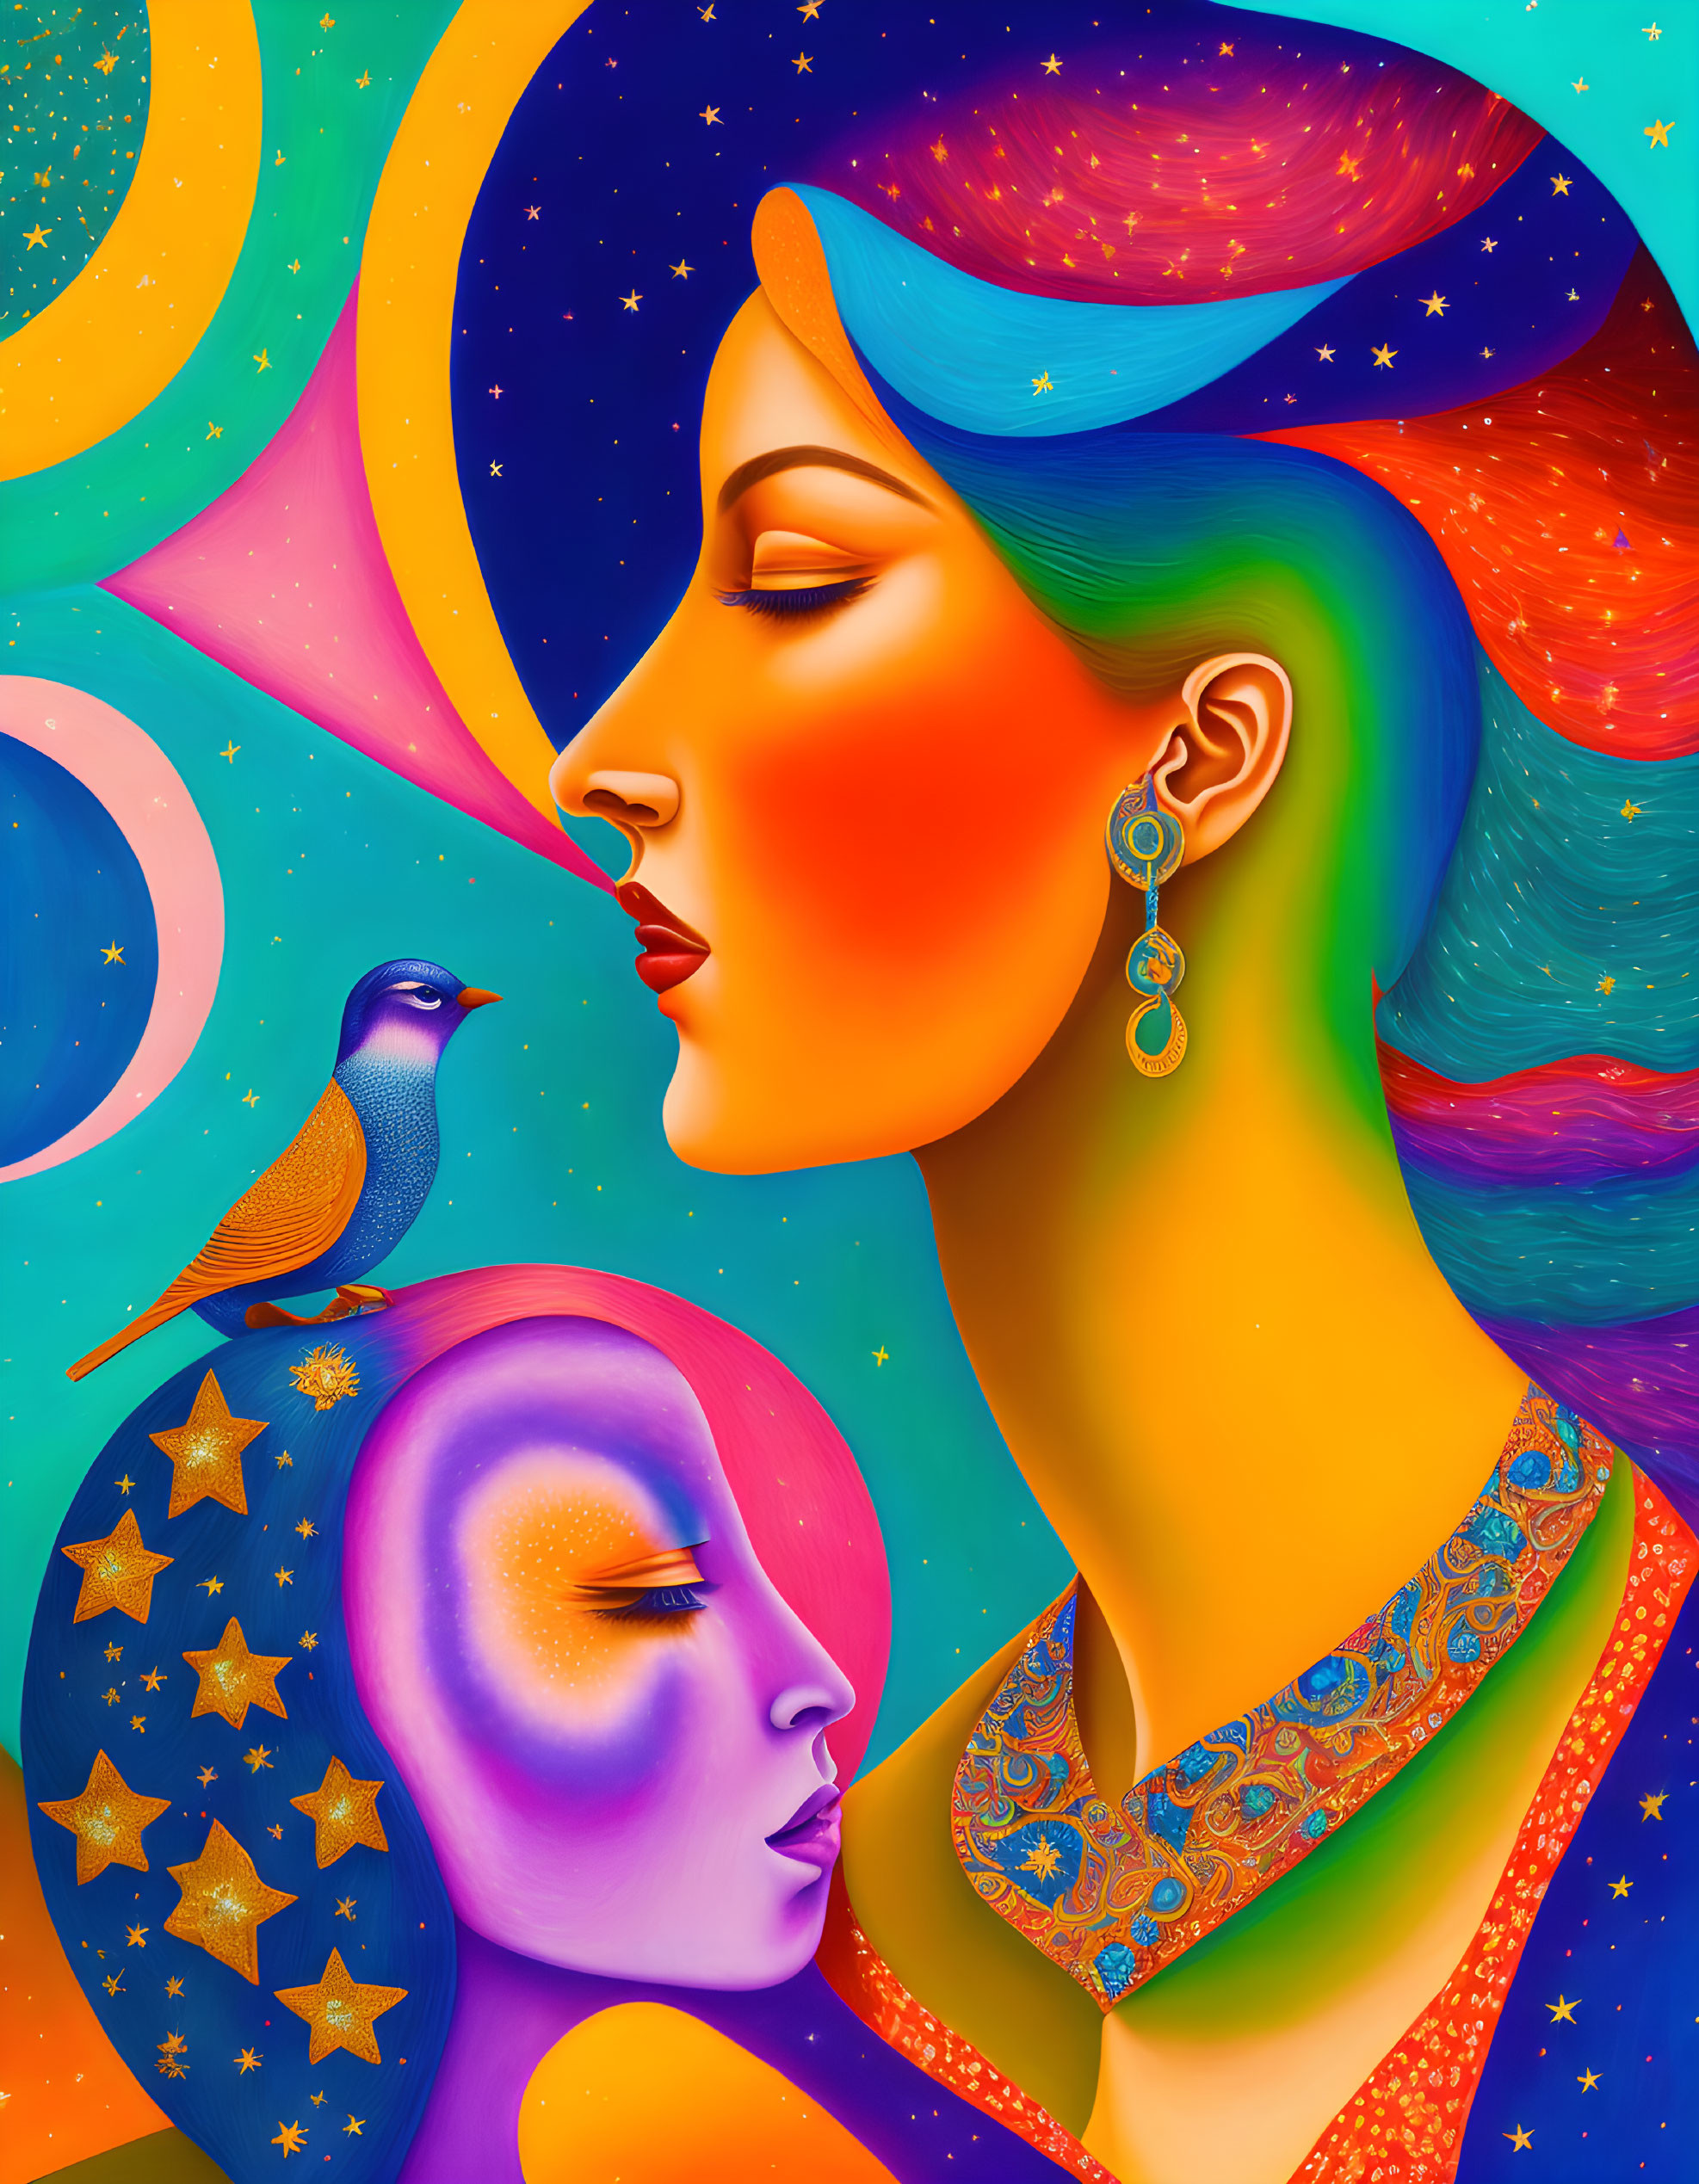 Colorful Cosmic Illustration of Two Female Figures with Bird and Celestial Elements